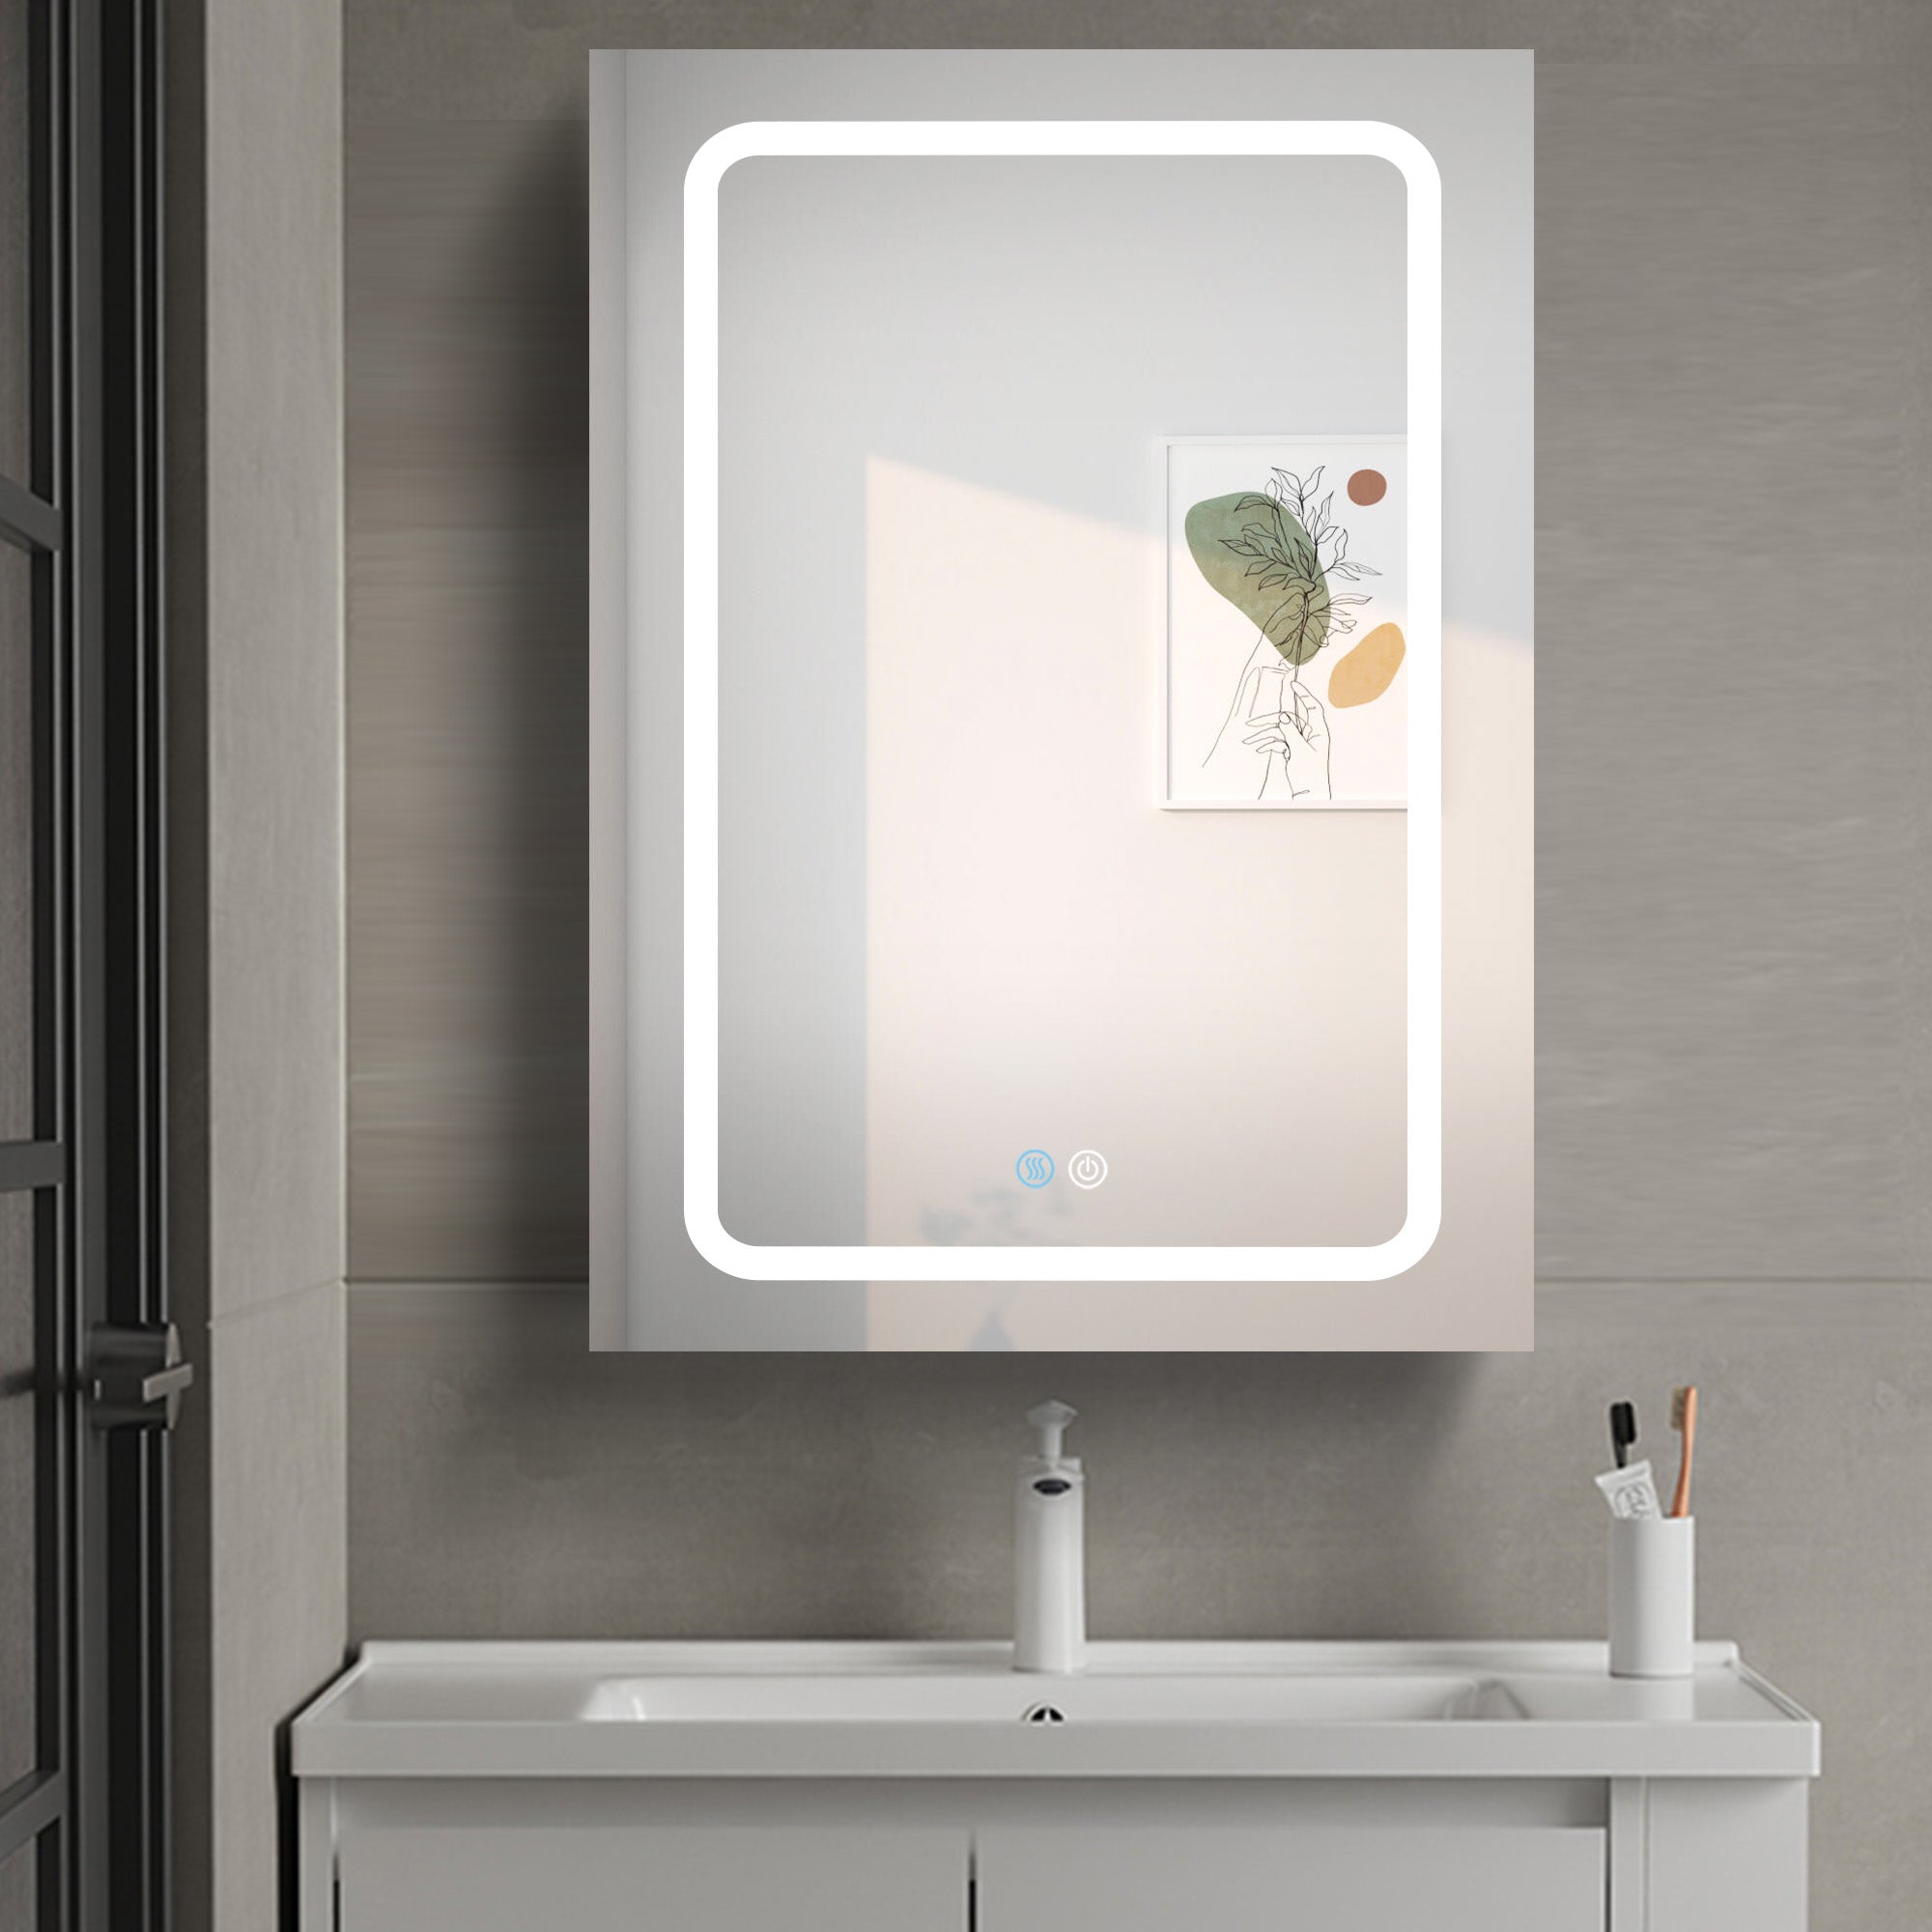 ZNTS 30x20 inch LED Bathroom Medicine Cabinet Surface Mounted Cabinets With Lighted Mirror White Right W995107192